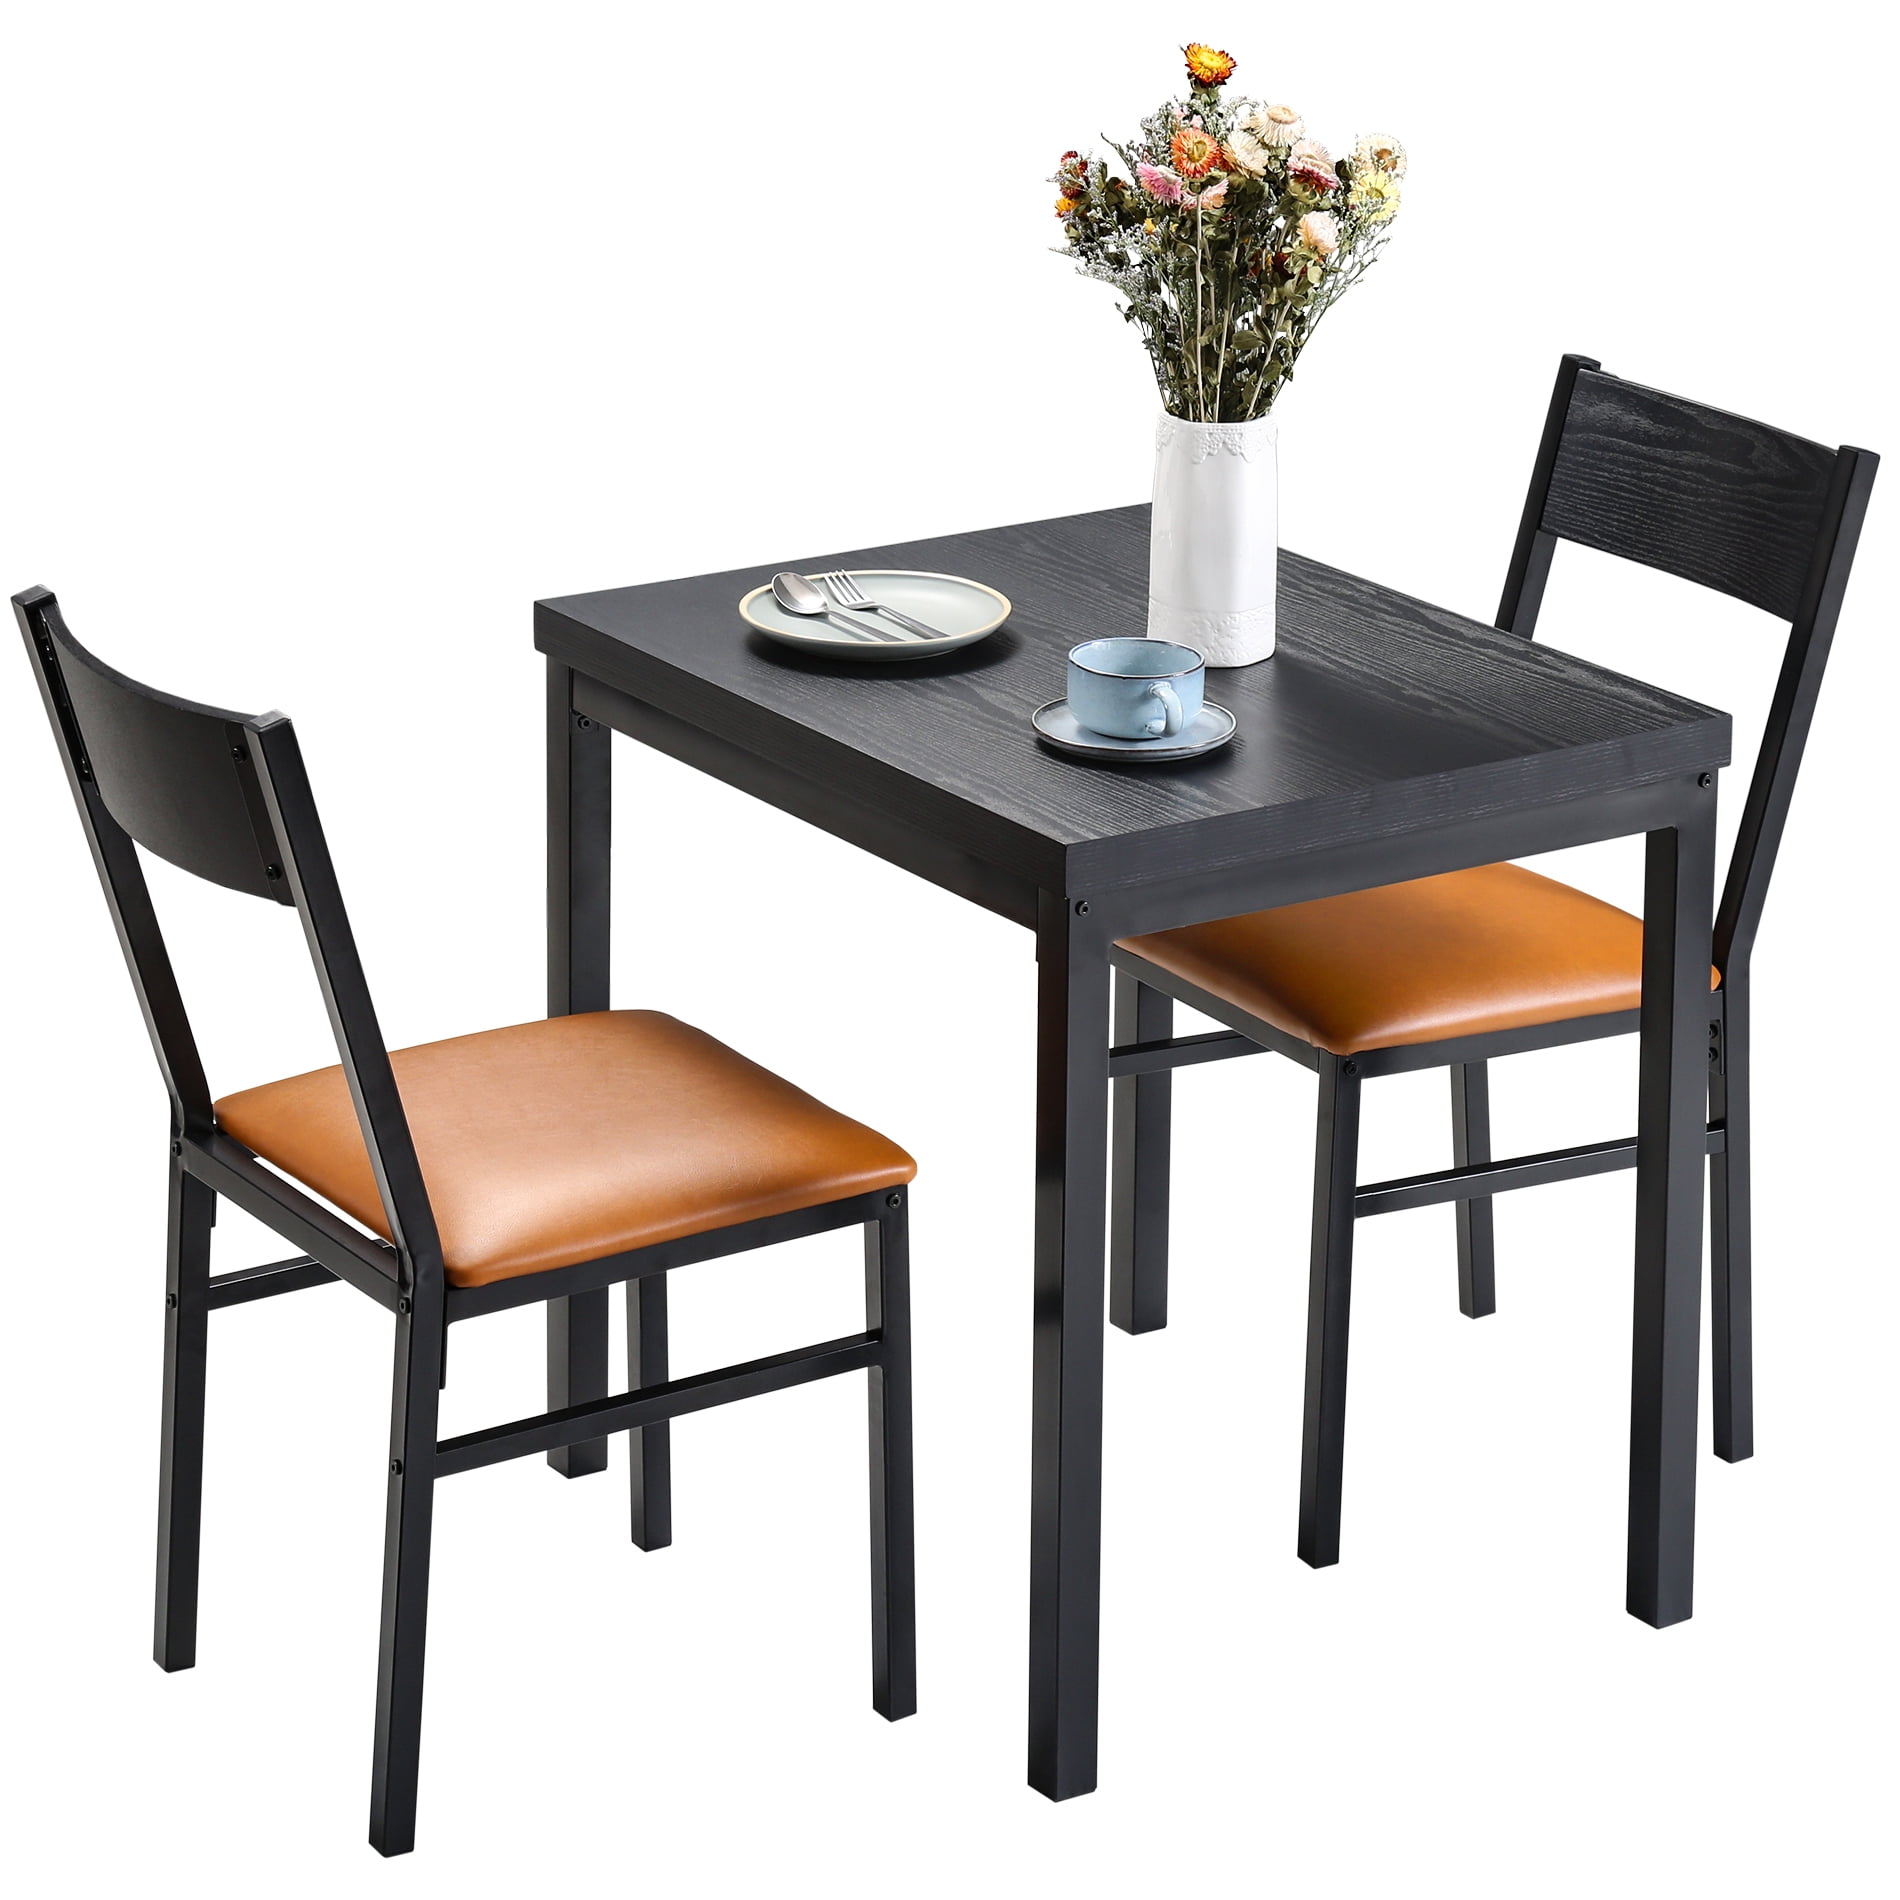 3 Piece Dining Table Set with Cushioned Chairs for Dining Room, Kitchen